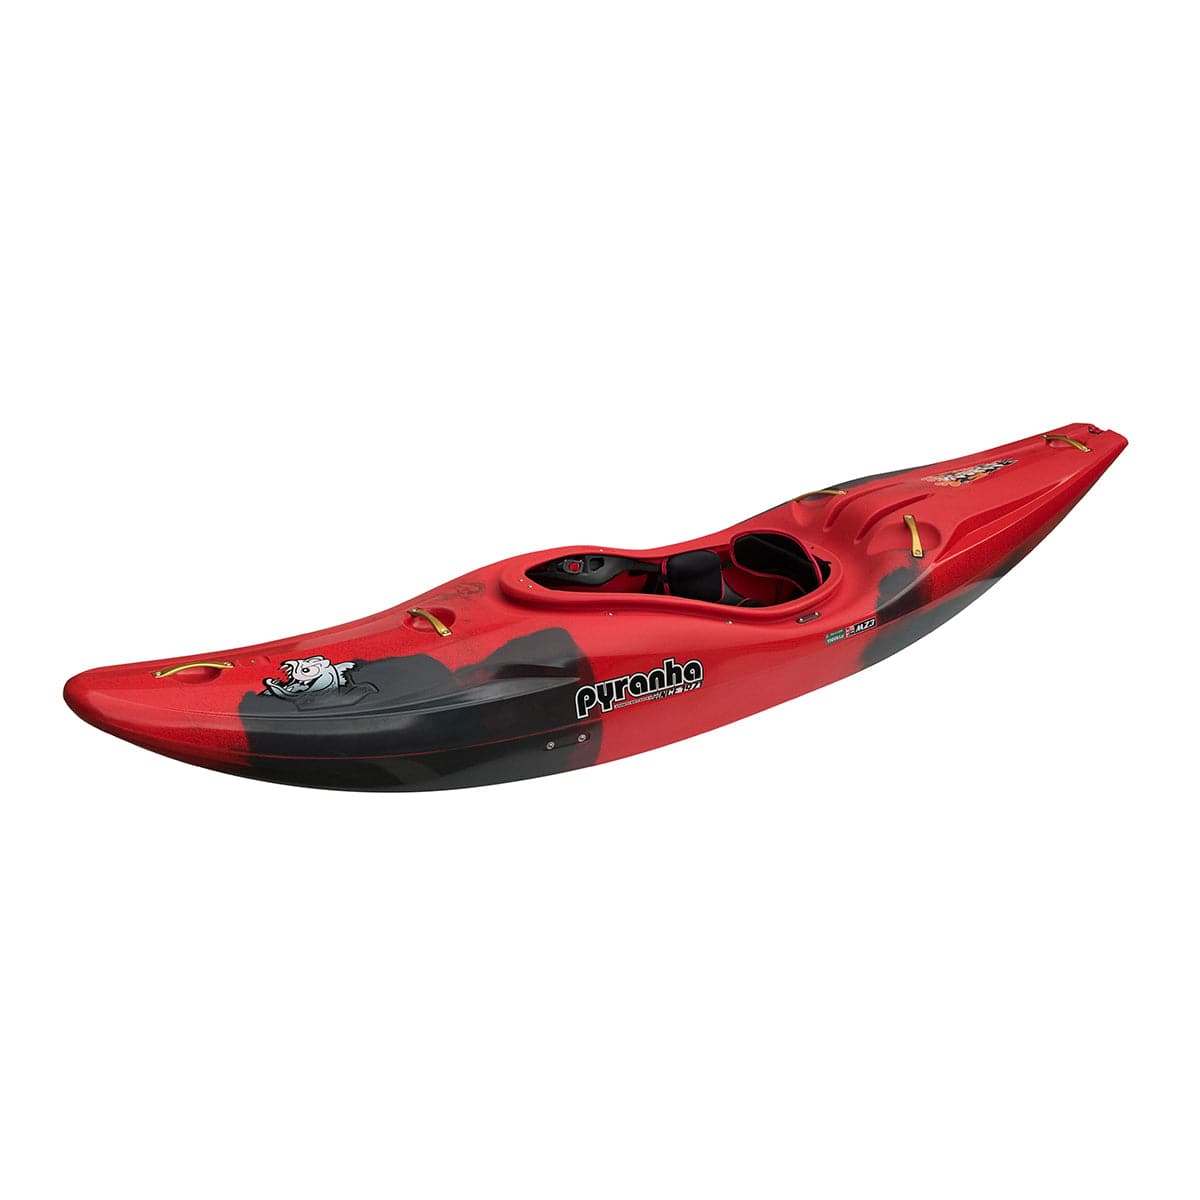 Featuring the Scorch X creek boat, river runner kayak manufactured by Pyranha shown here from a fourth angle.